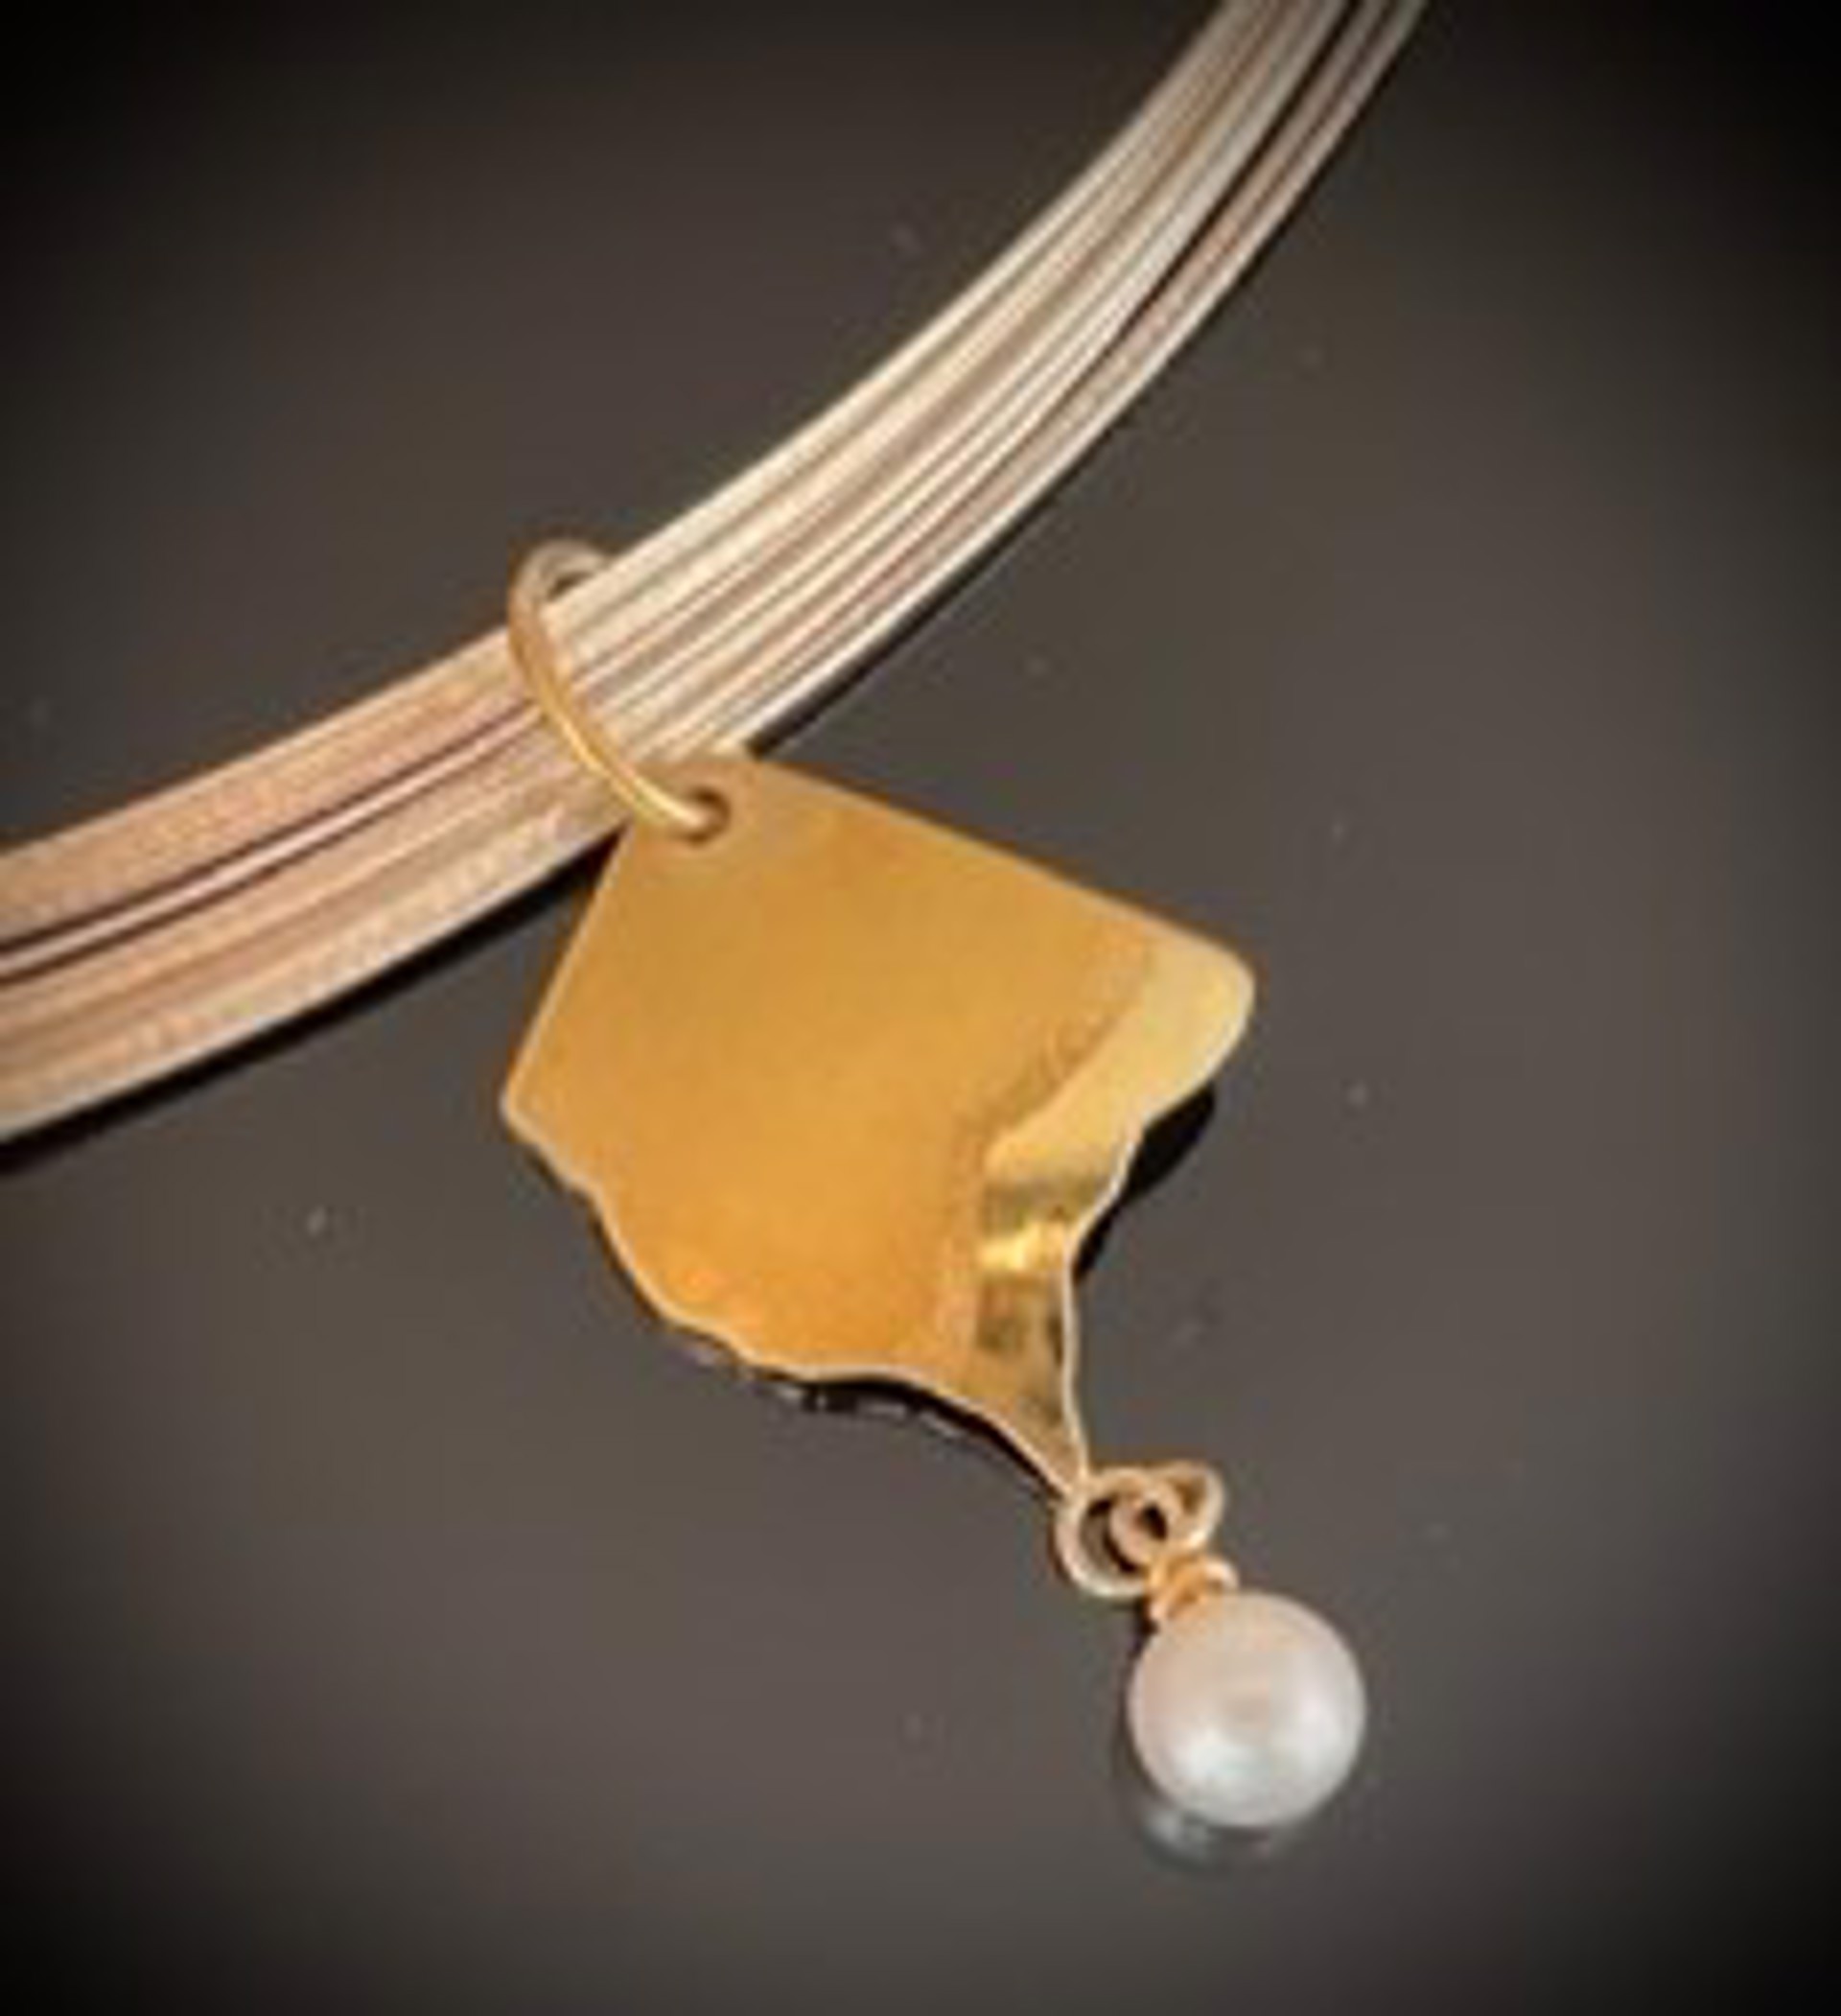 Distant Planets Neckpiece with White Pearl by Celest Michelotti